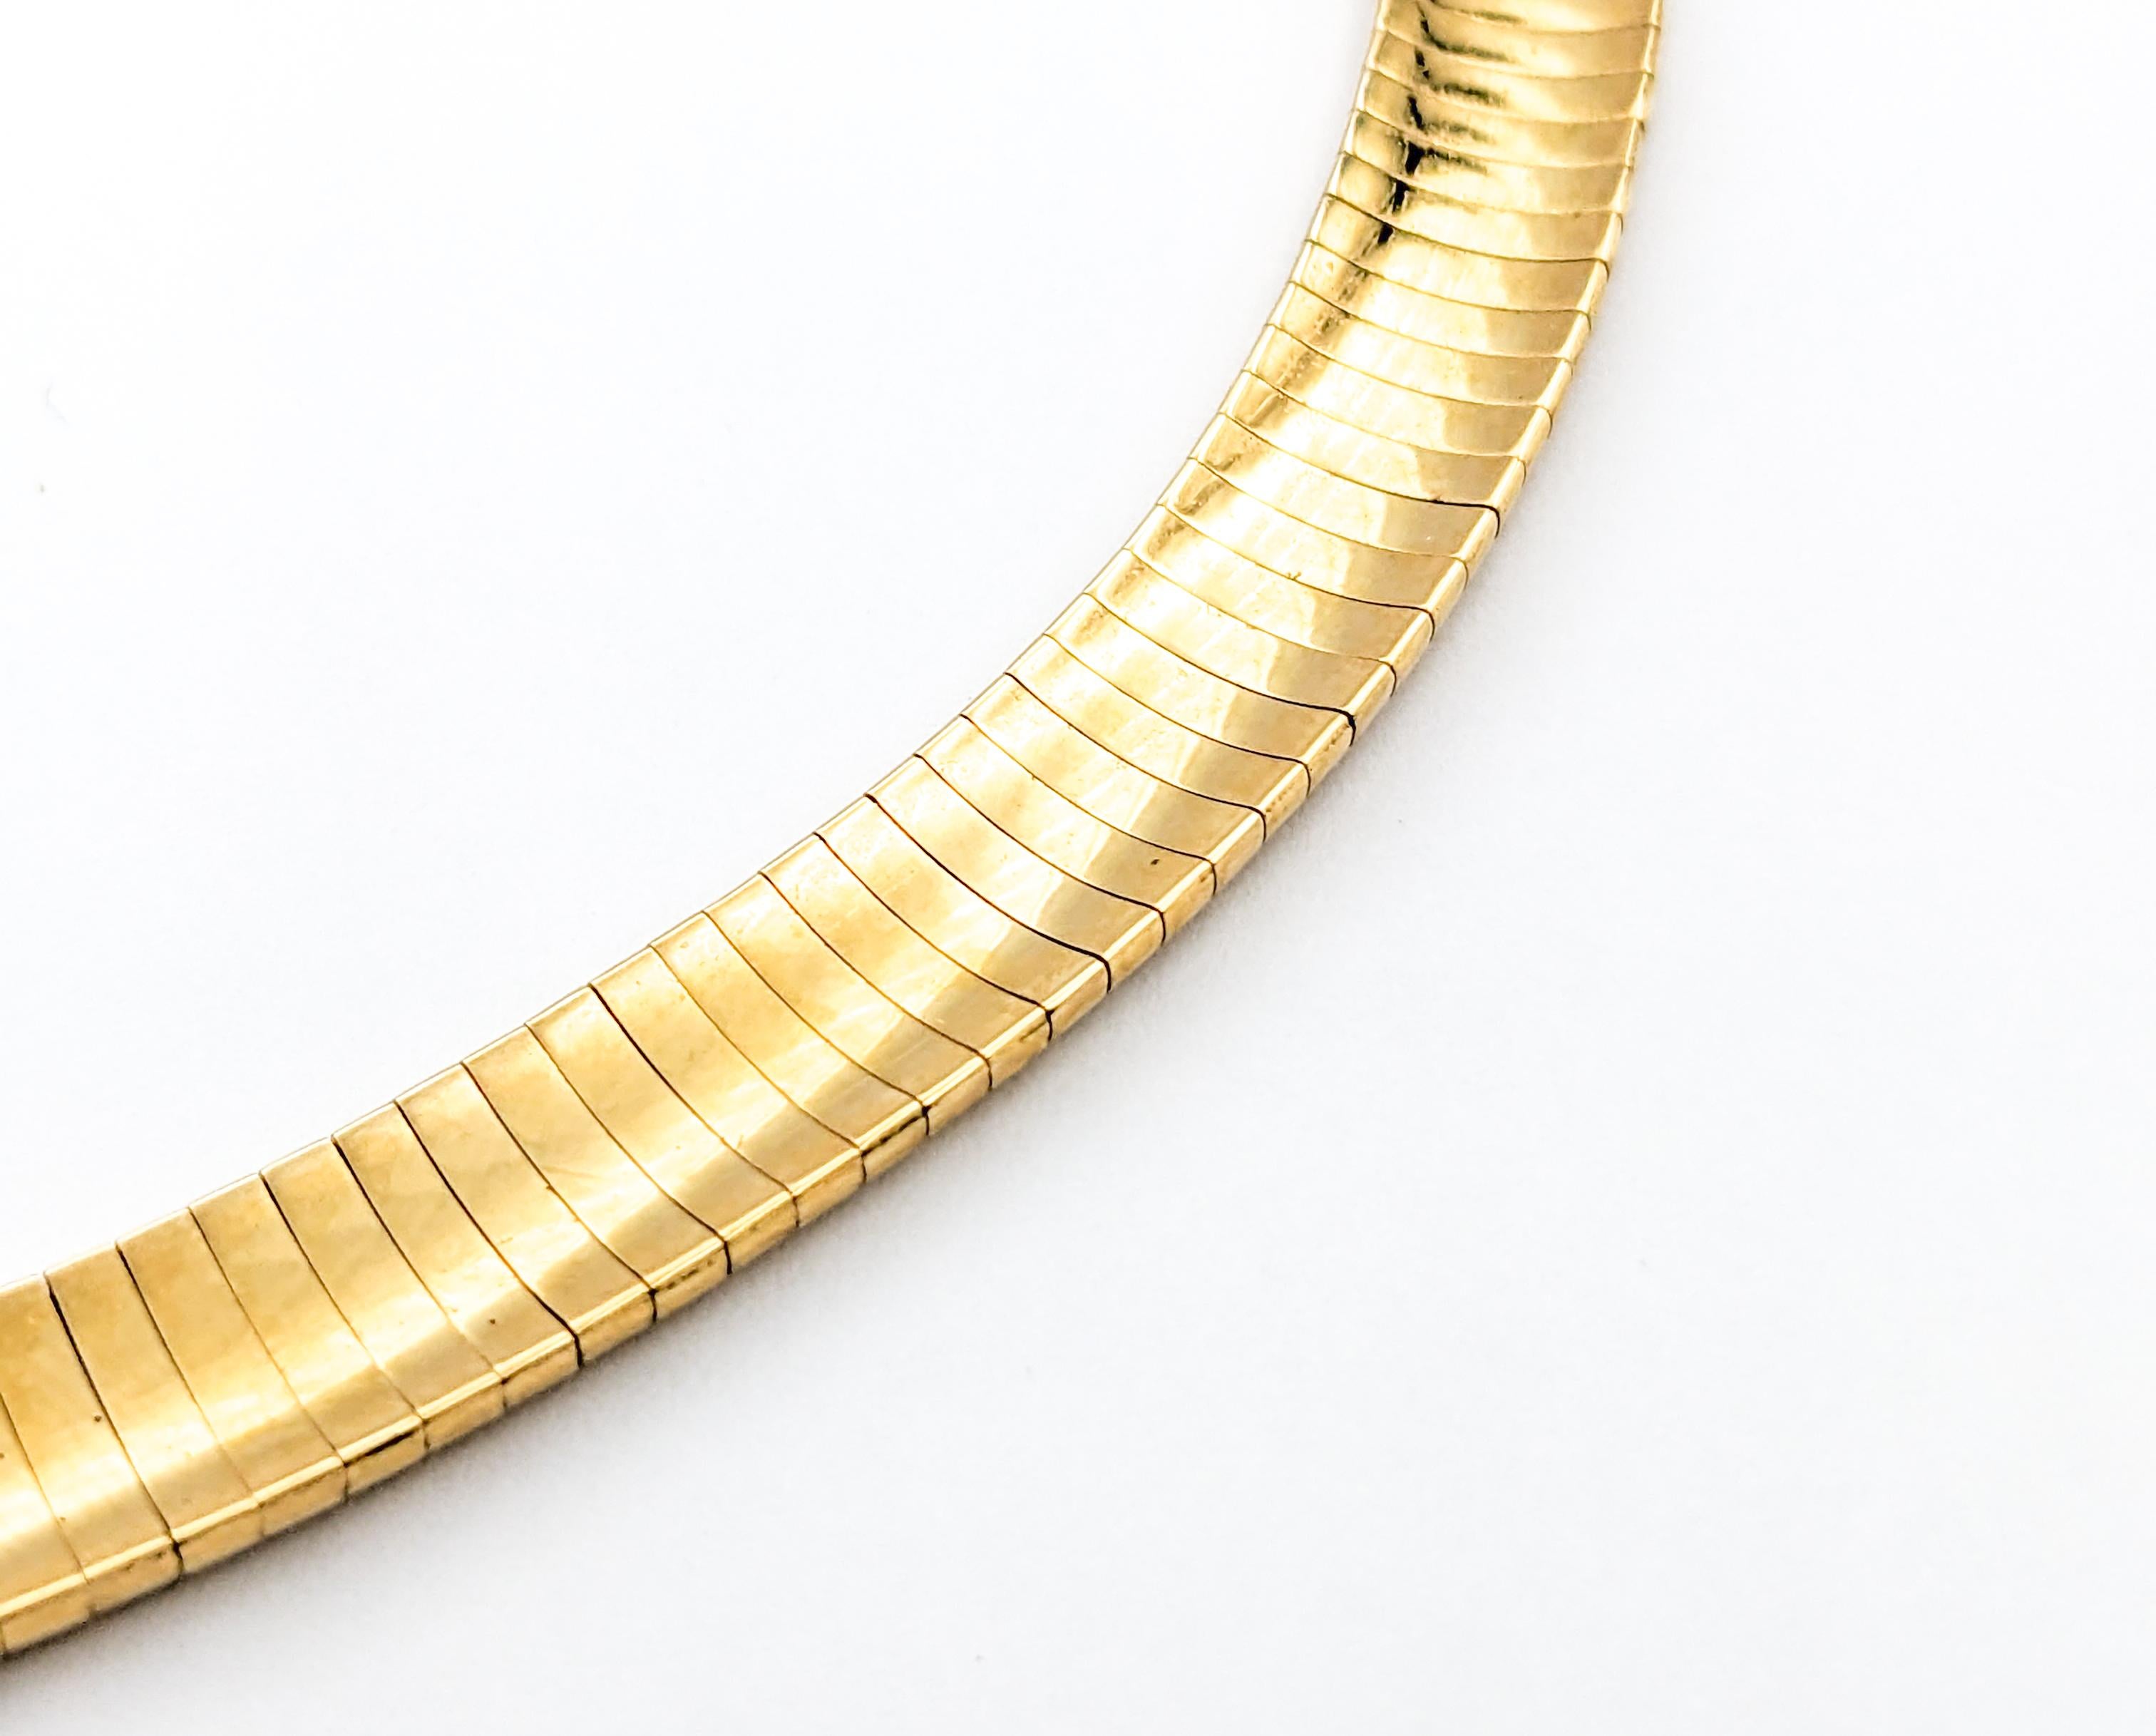 Omega Chain In Yellow Gold

Introducing an exquisite gold fashion necklace crafted in 14kt yellow gold. This elegant piece features an Omega chain, known for its sleek and sophisticated design. The necklace measures 17 inches in length and is 8mm